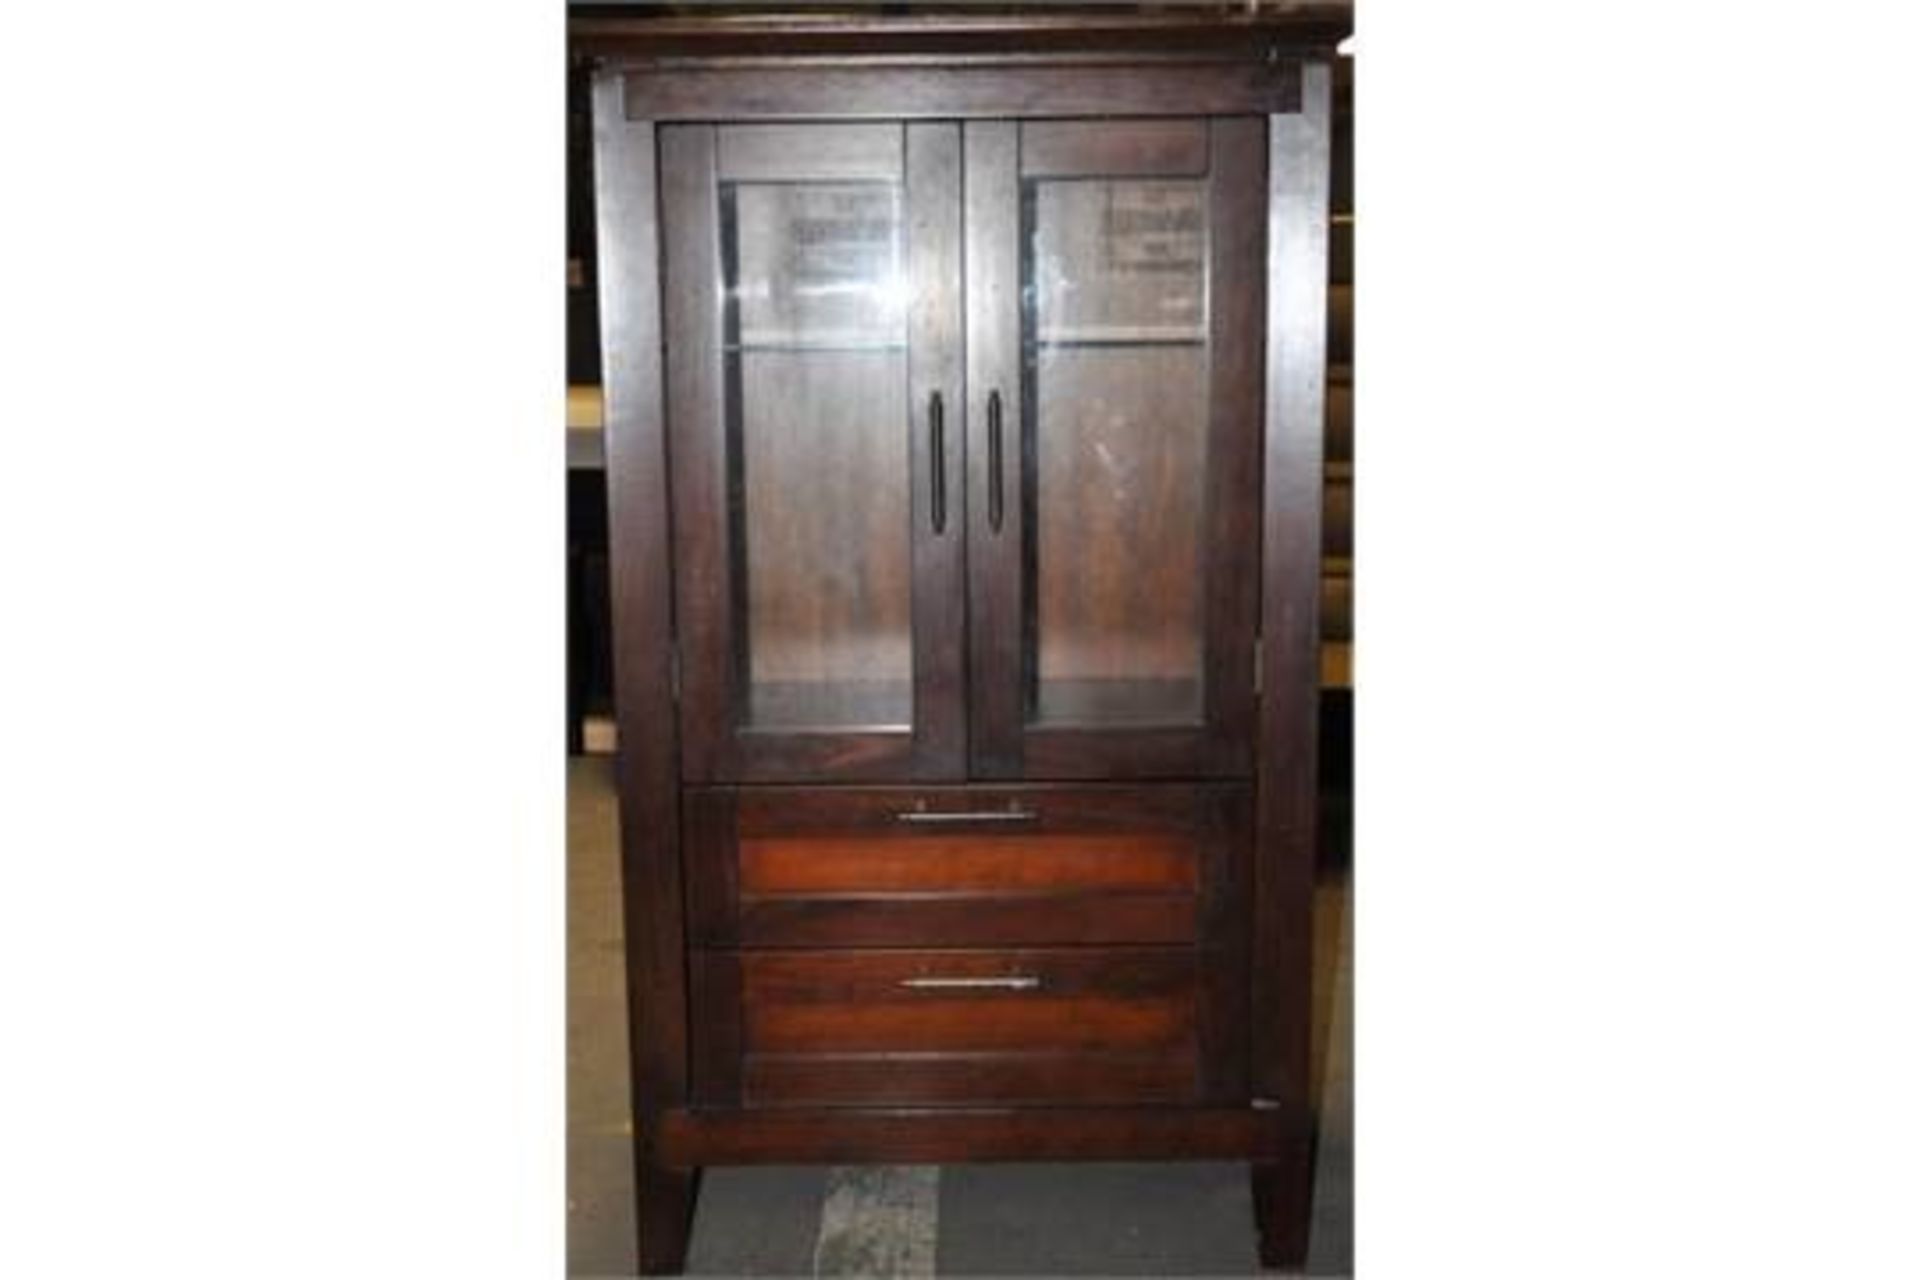 1 x Henley Traditional Red Mahogany Drinks Cabinet by Bentley Designs – Comes with Drawers & Glass - Image 2 of 7